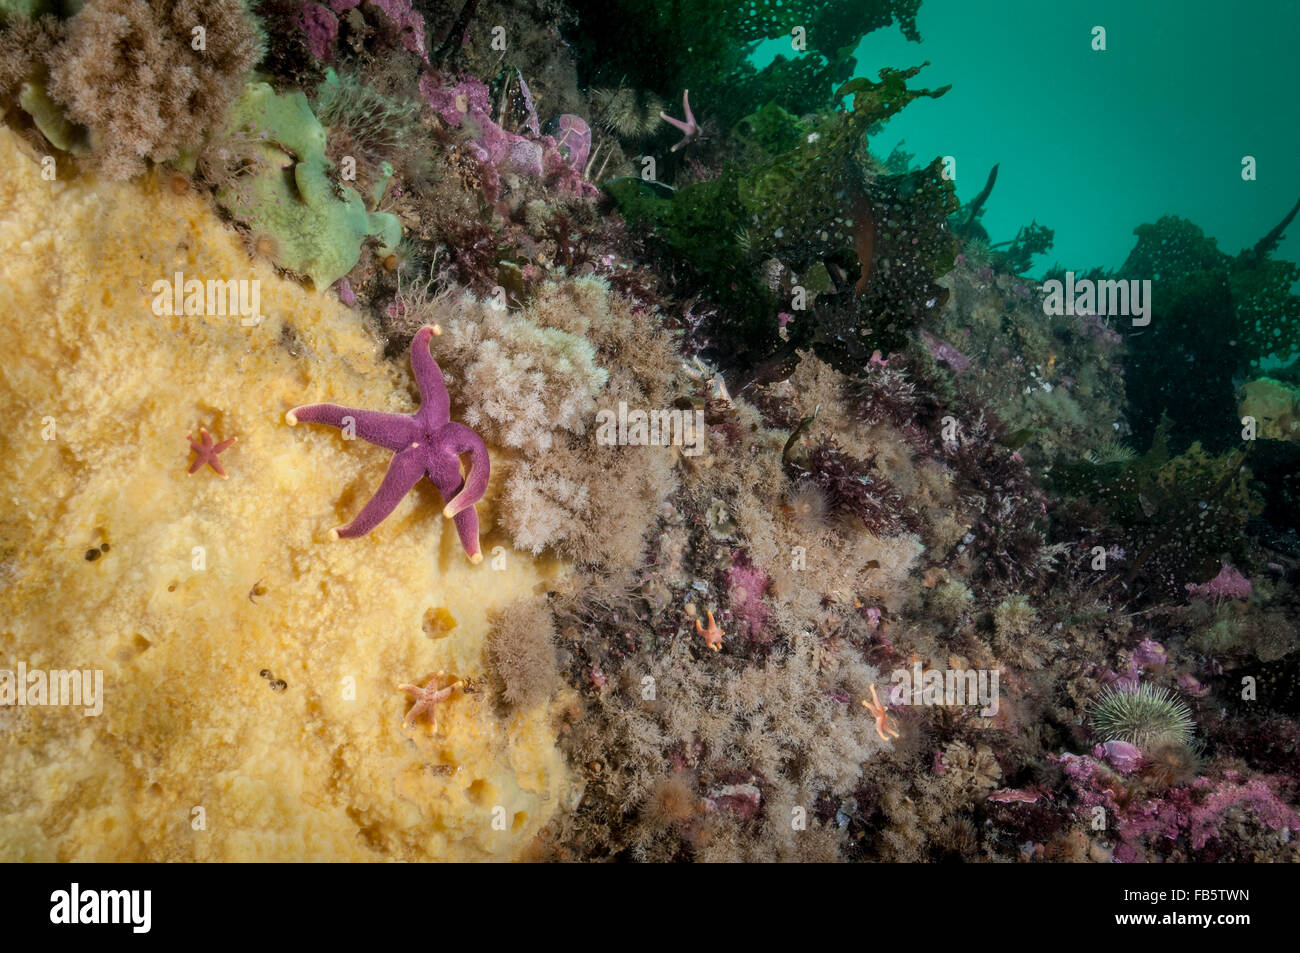 Blood Sea Star underwater feeding on a marine sponge in the St. Lawrence River Stock Photo